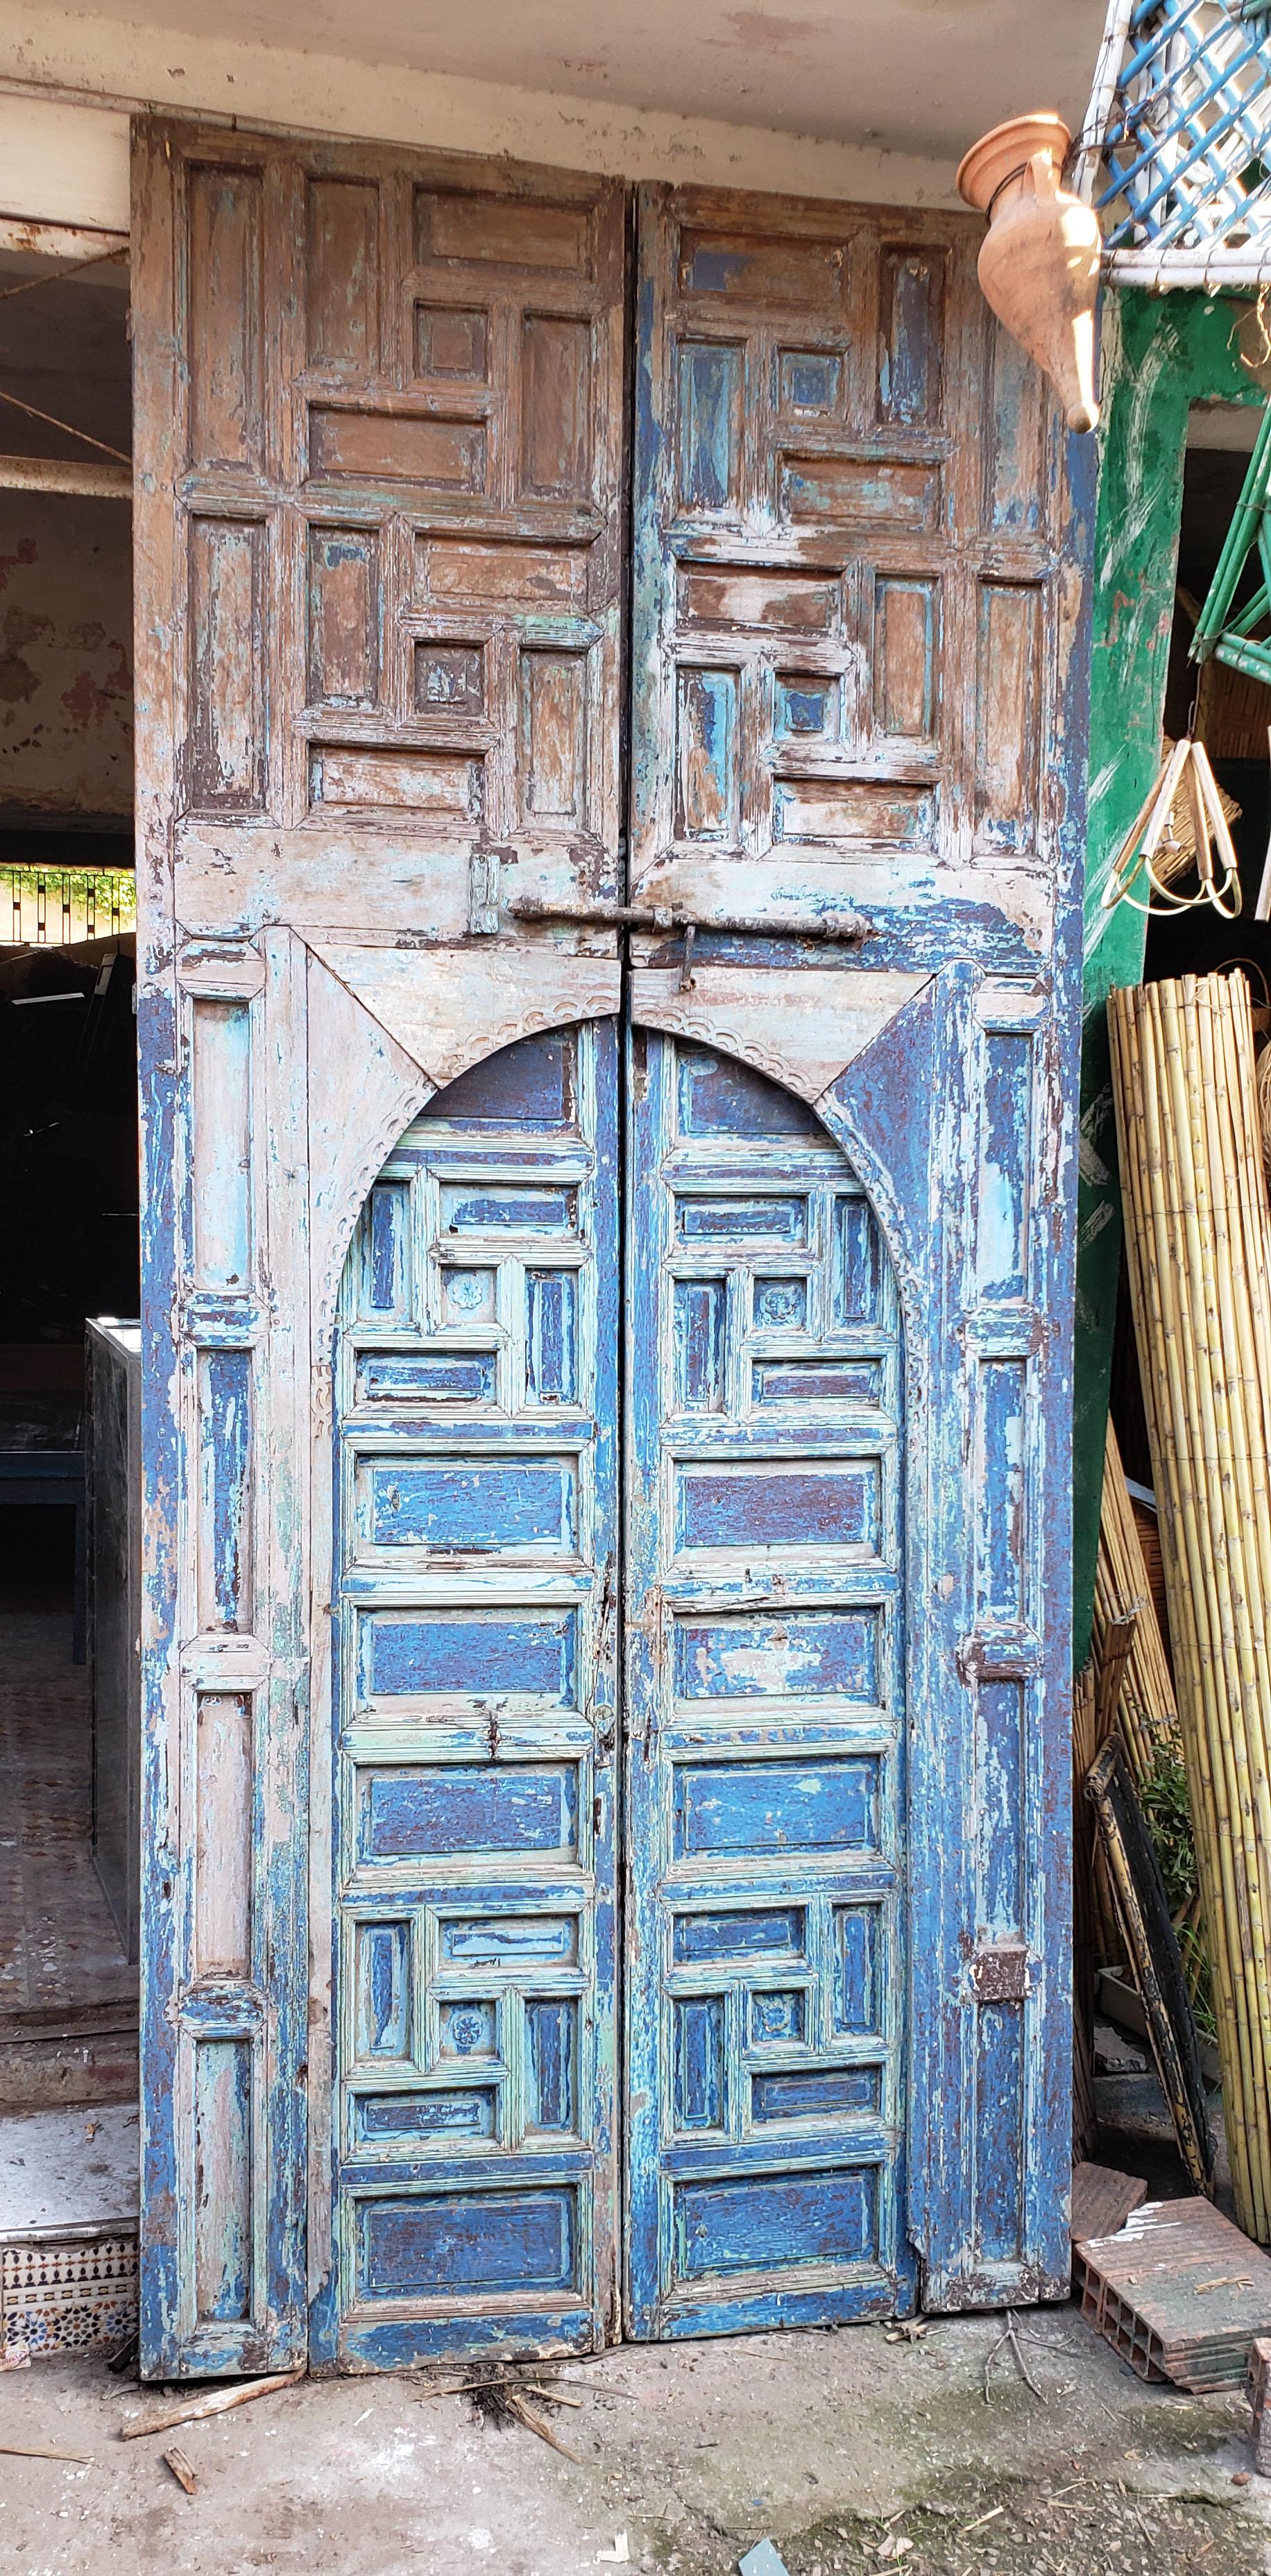 The Giant Gentle, as it's called.
Very old double panel Moroccan hand painted double door measuring approximately 118